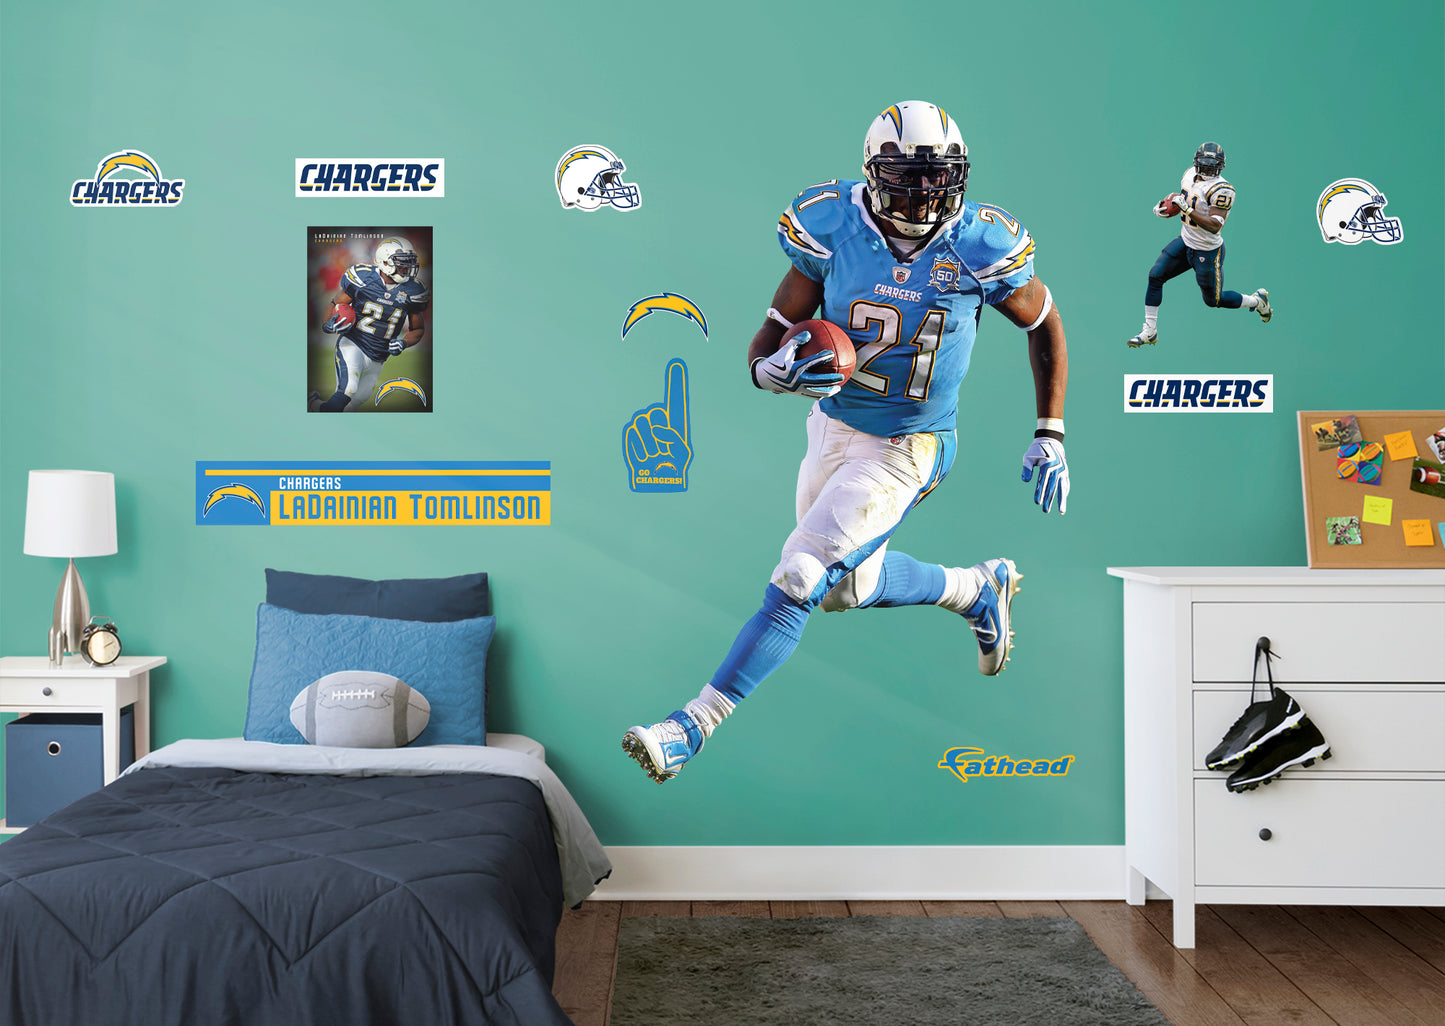 San Diego Chargers: LaDainian Tomlinson 2021 Legend        - Officially Licensed NFL Removable Wall   Adhesive Decal